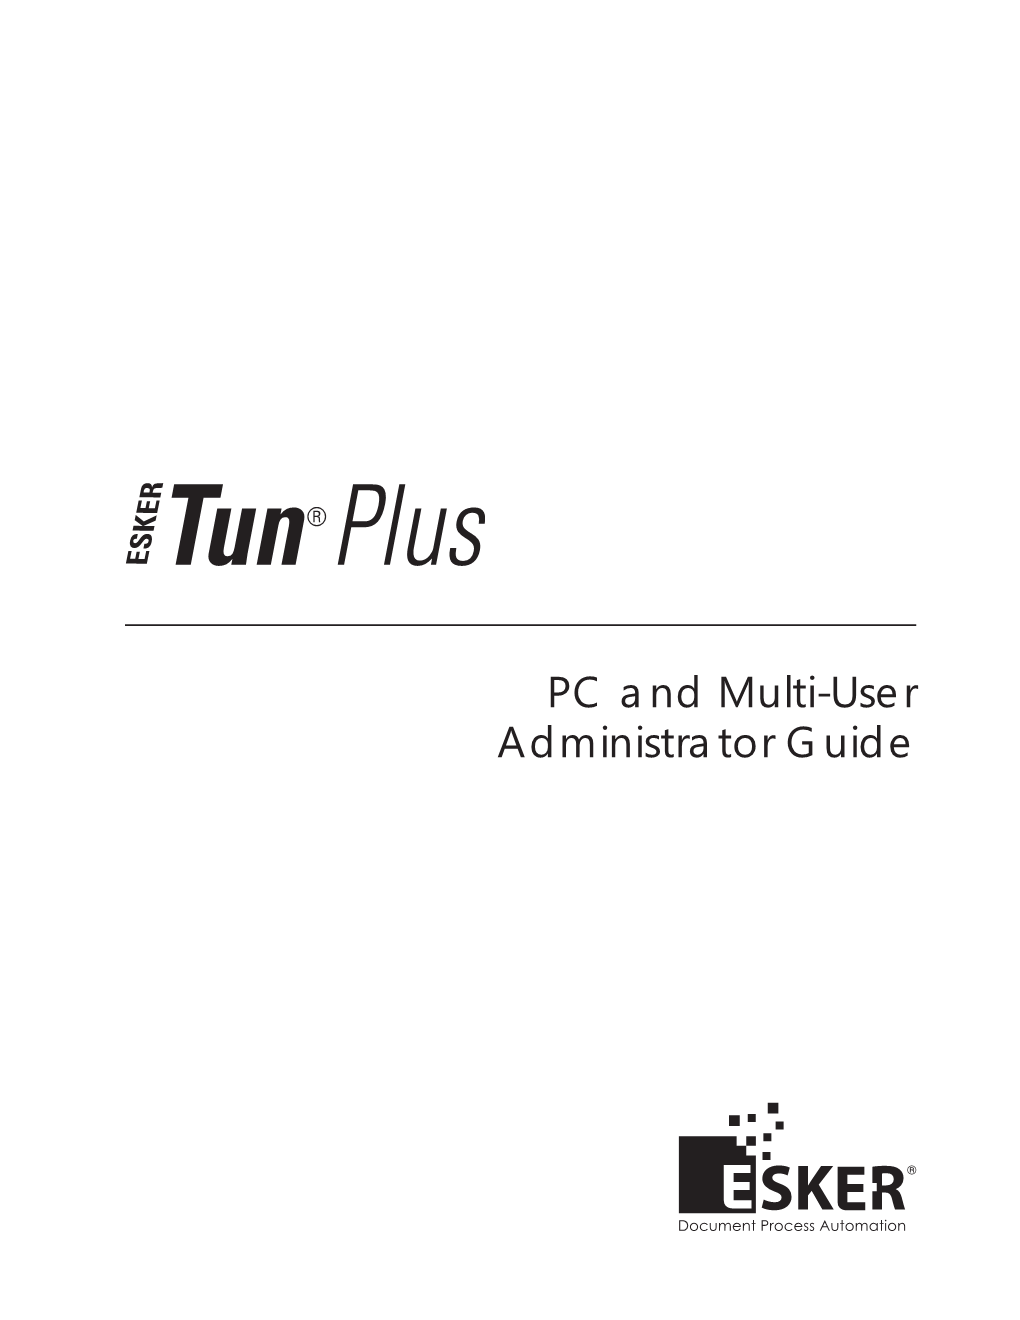 PC and Multi-User Administrator Guide Tun Plus 2016 - Version 16.0.0 Issued February 2016 Copyright © 1989-2016 Esker S.A